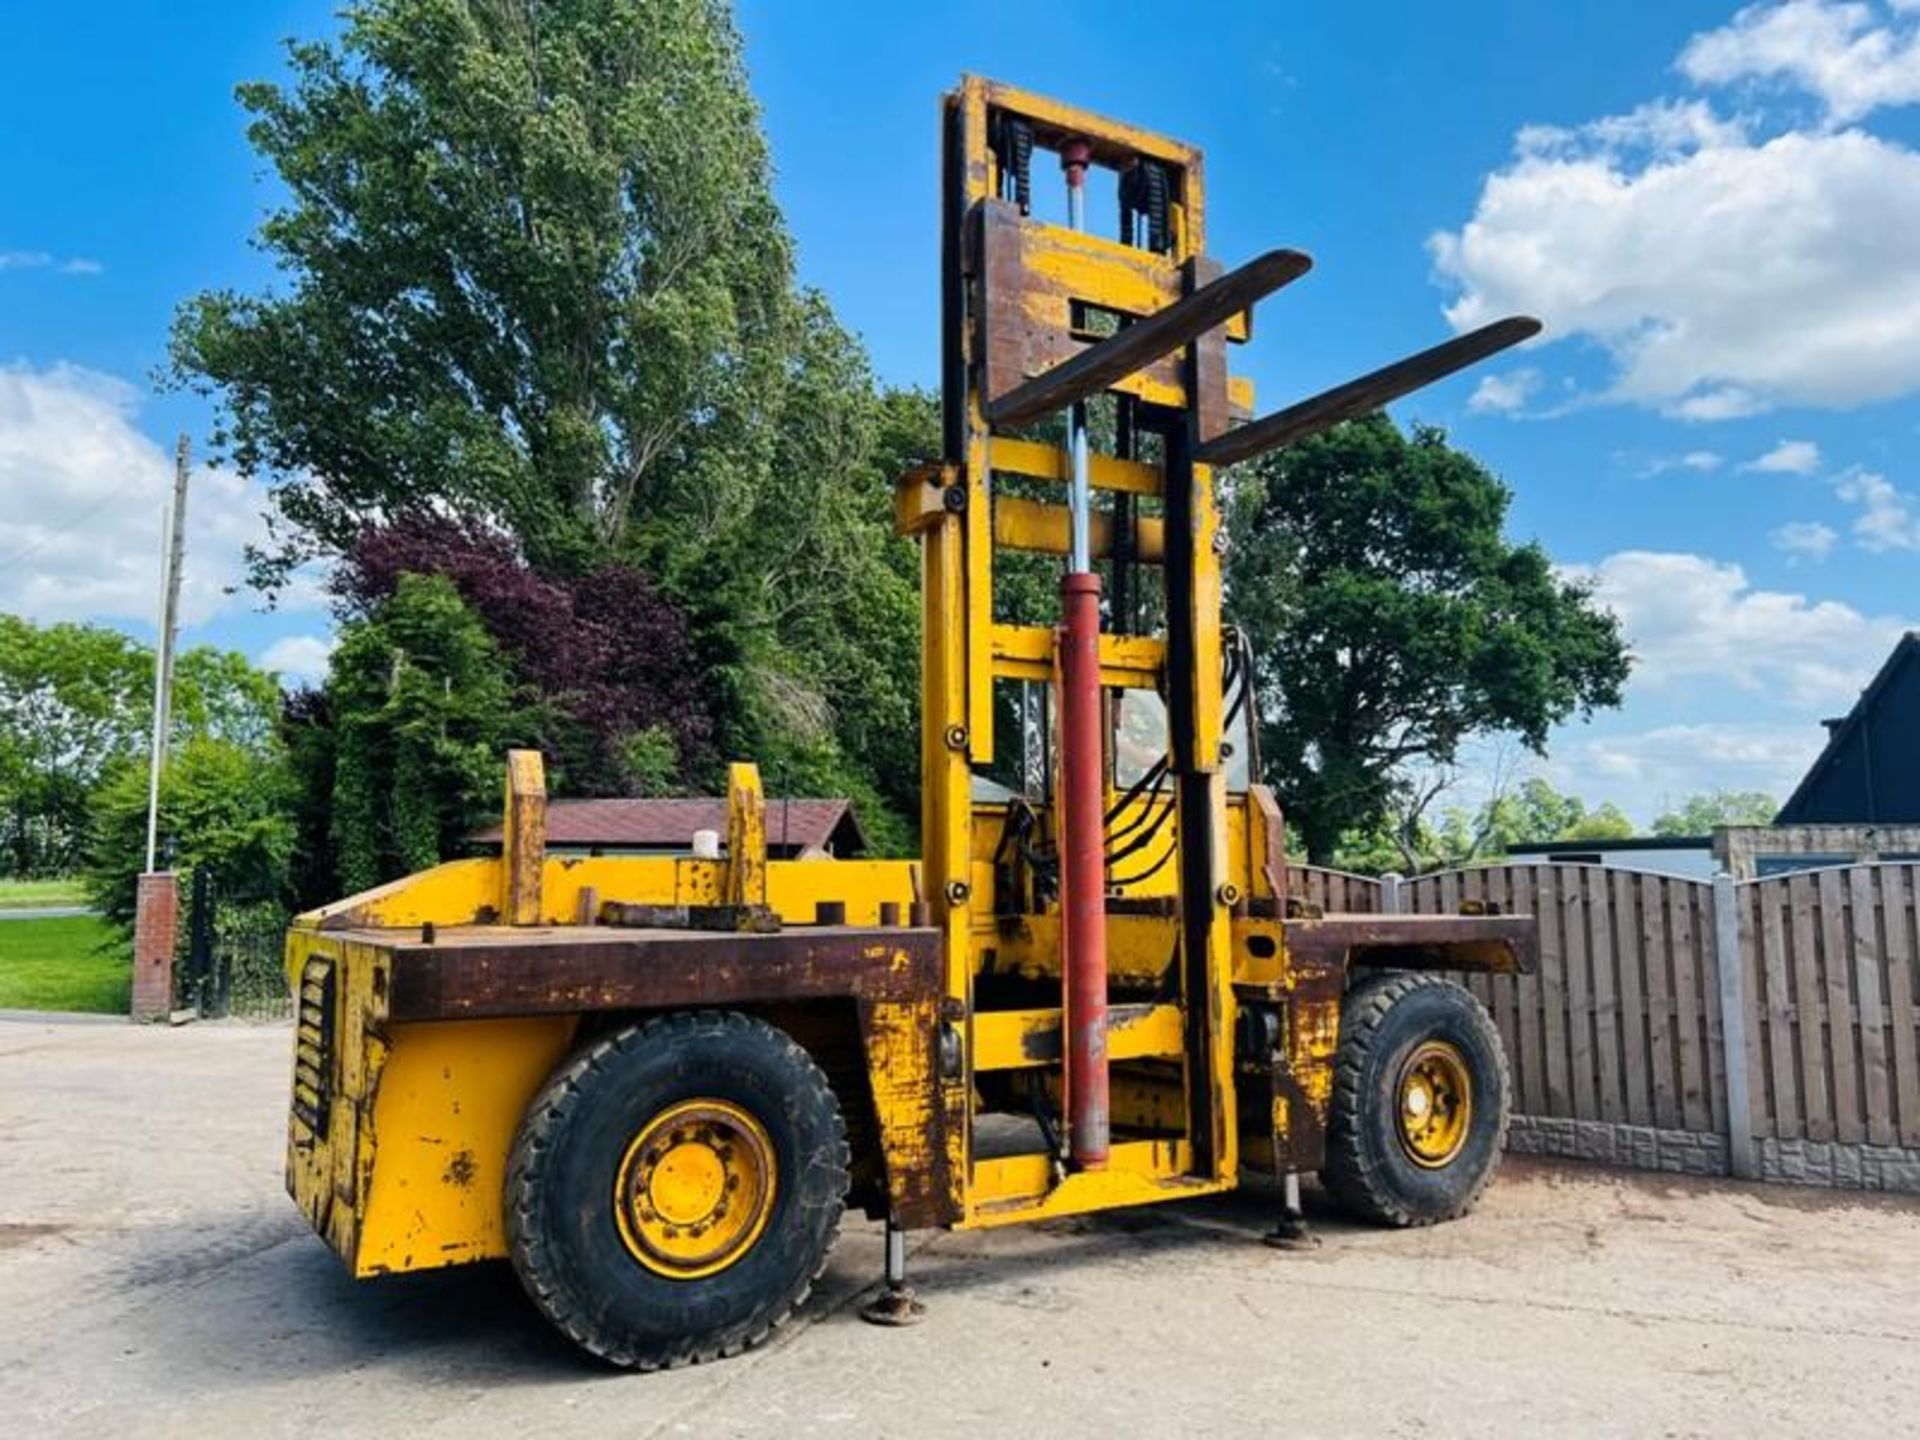 SSP SIDE LOAD DIESEL FORKLIFT C/W 2 X HYDRAULIC SUPPORT LEGS - Image 2 of 17